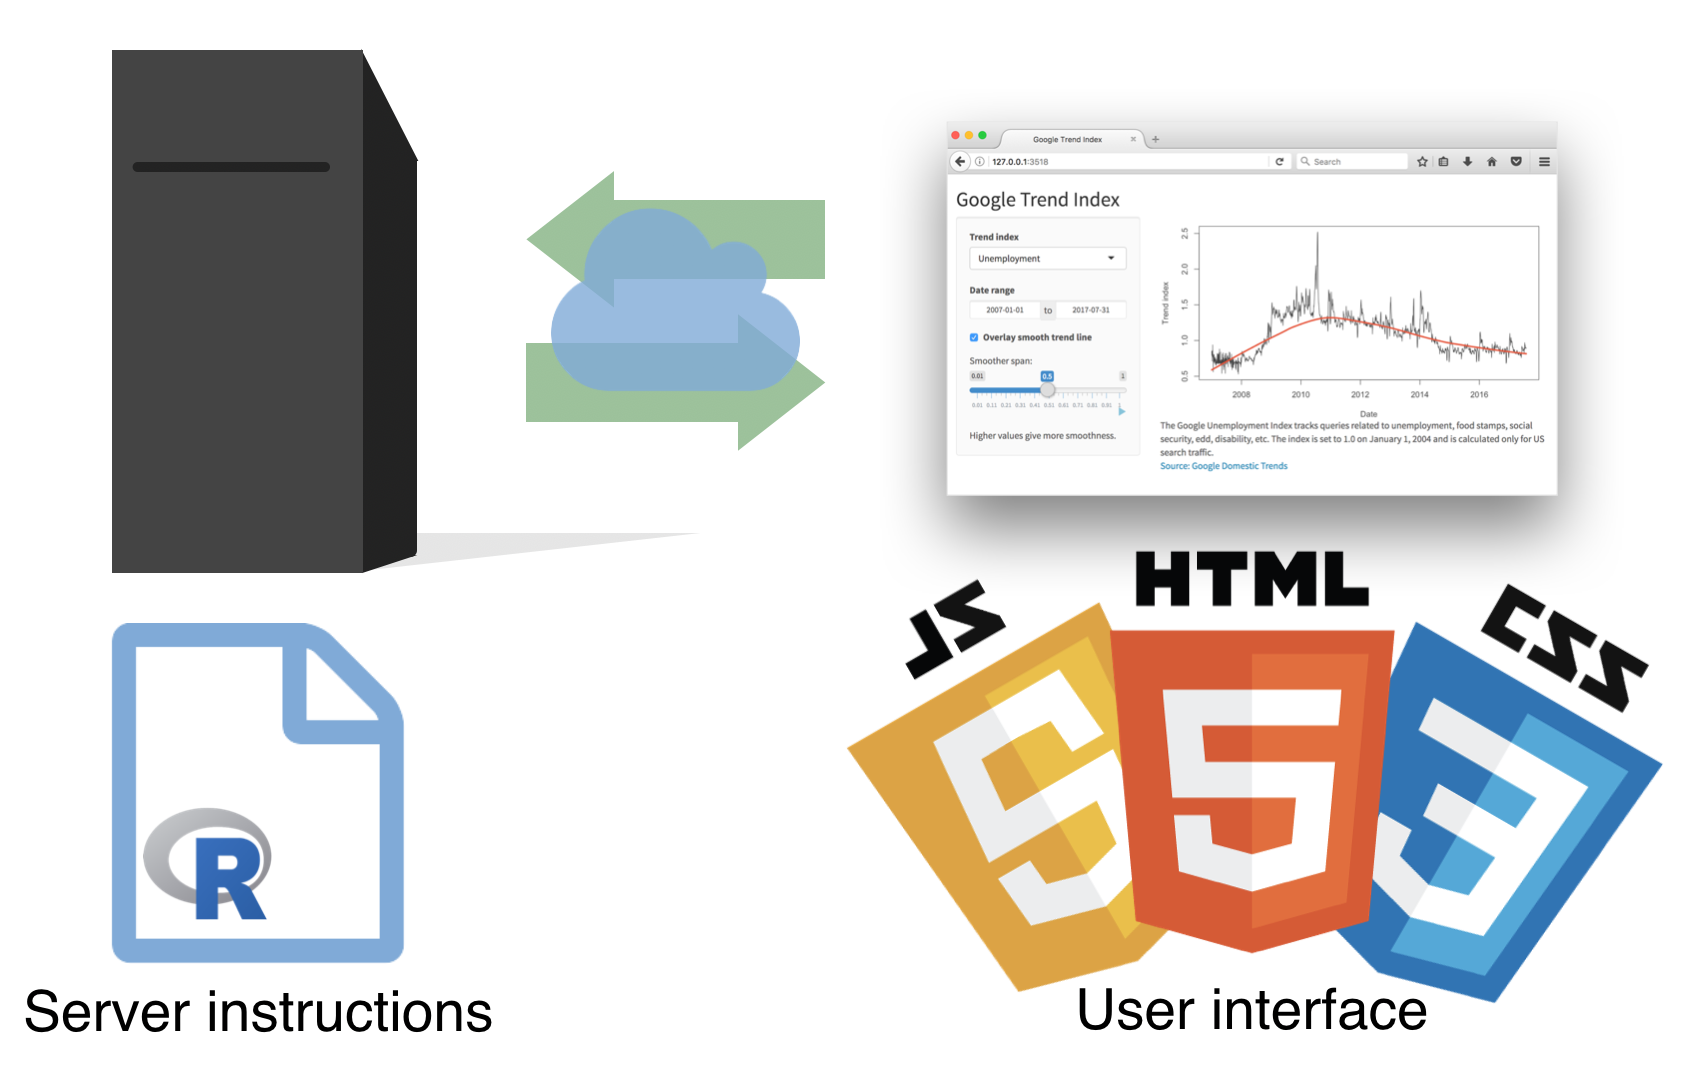 Figure of a server and R file saying 'Server instructions' on the left with arrows going back and forth, and with a picture of a cloud, to an image of a Shiny app on 'Google Trend Index' and images of JS, HTML and CSS labeled 'User interface' on the right.